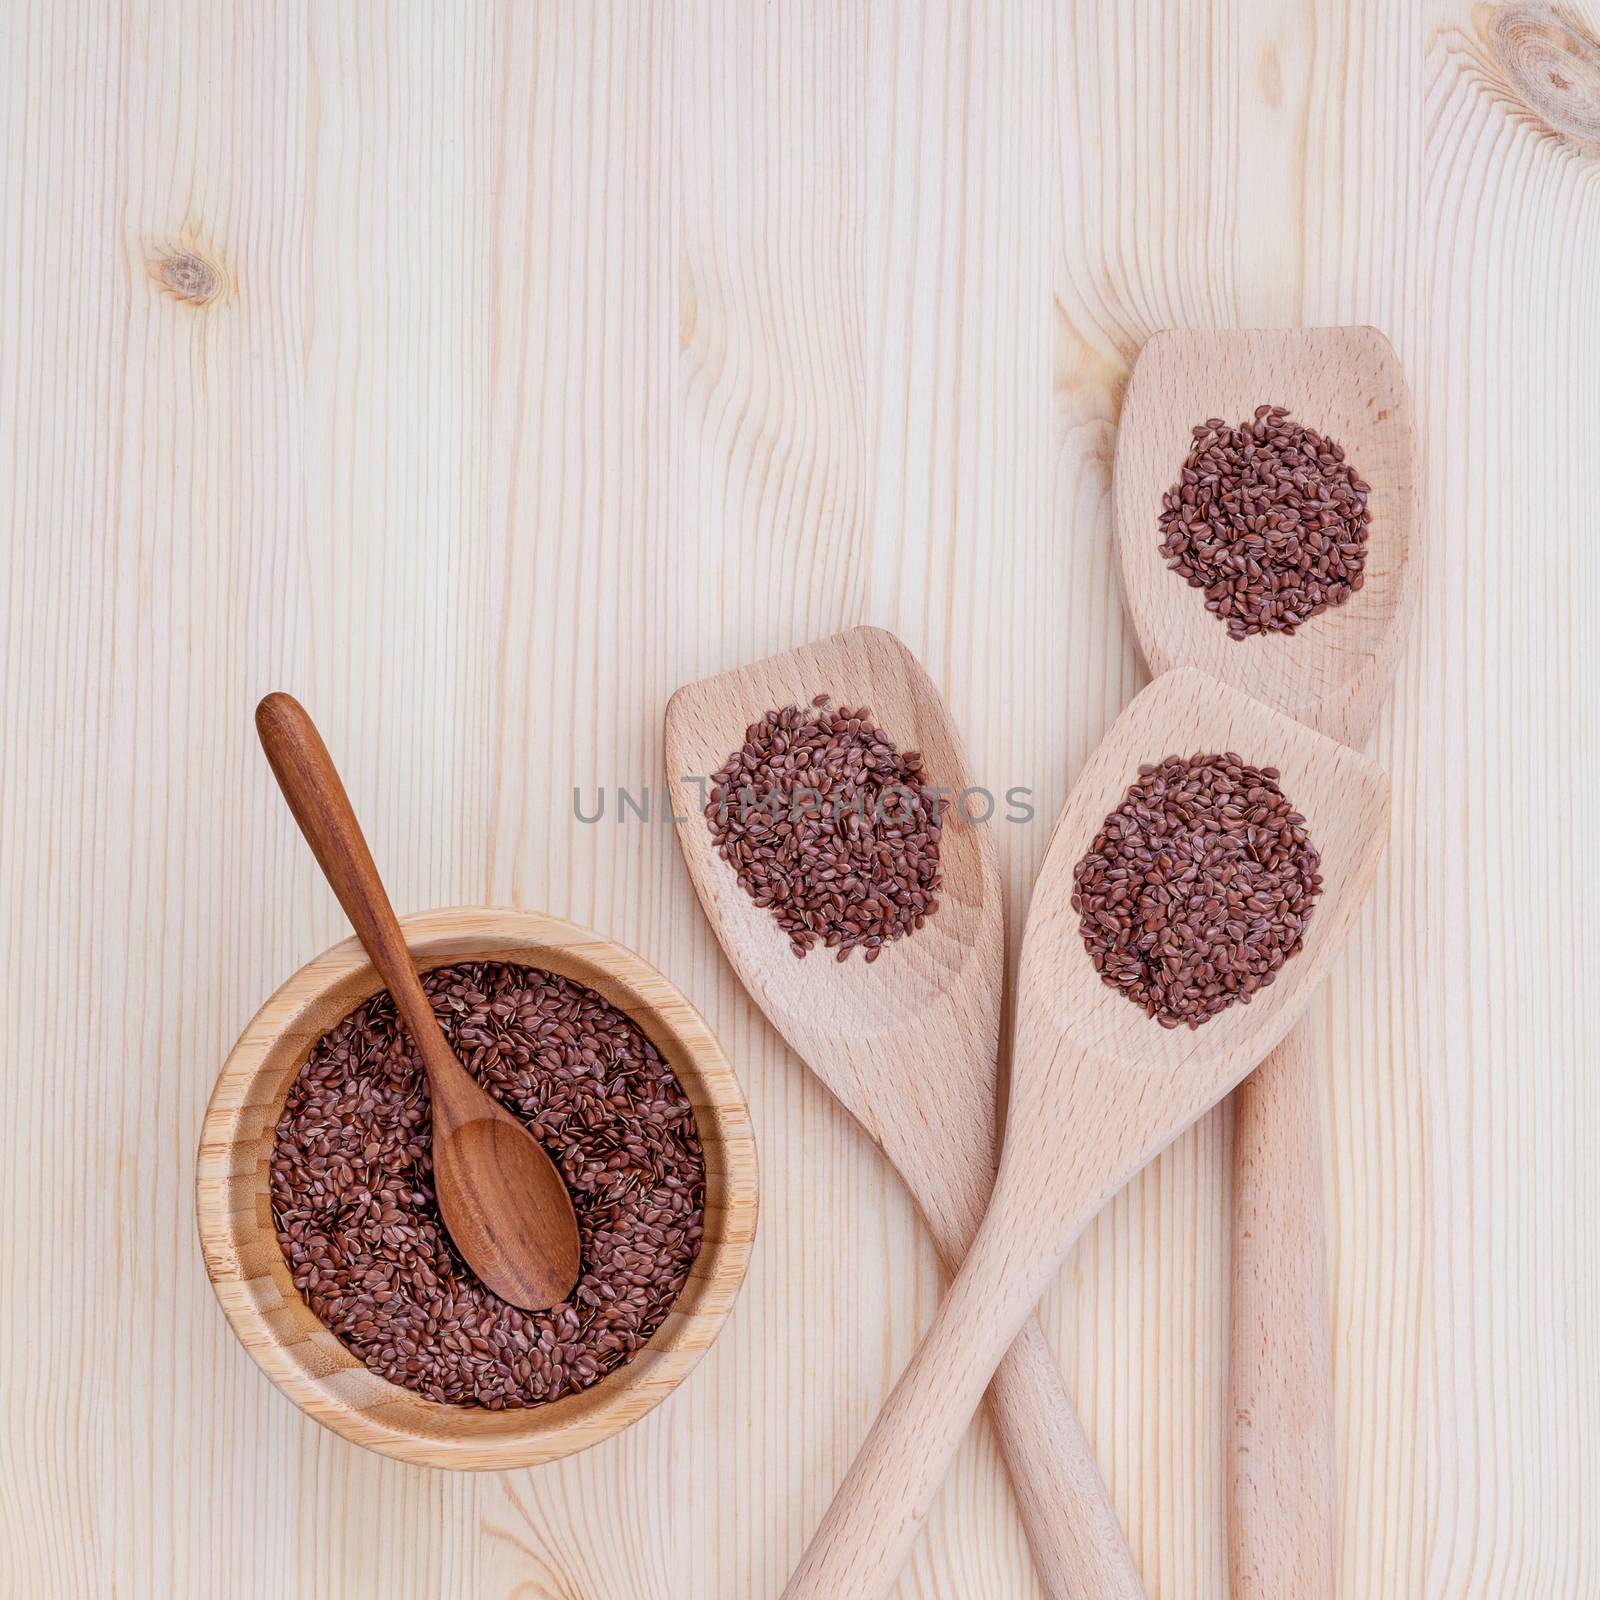 Alternative health care and dieting flax seeds in wooden spoon s by kerdkanno